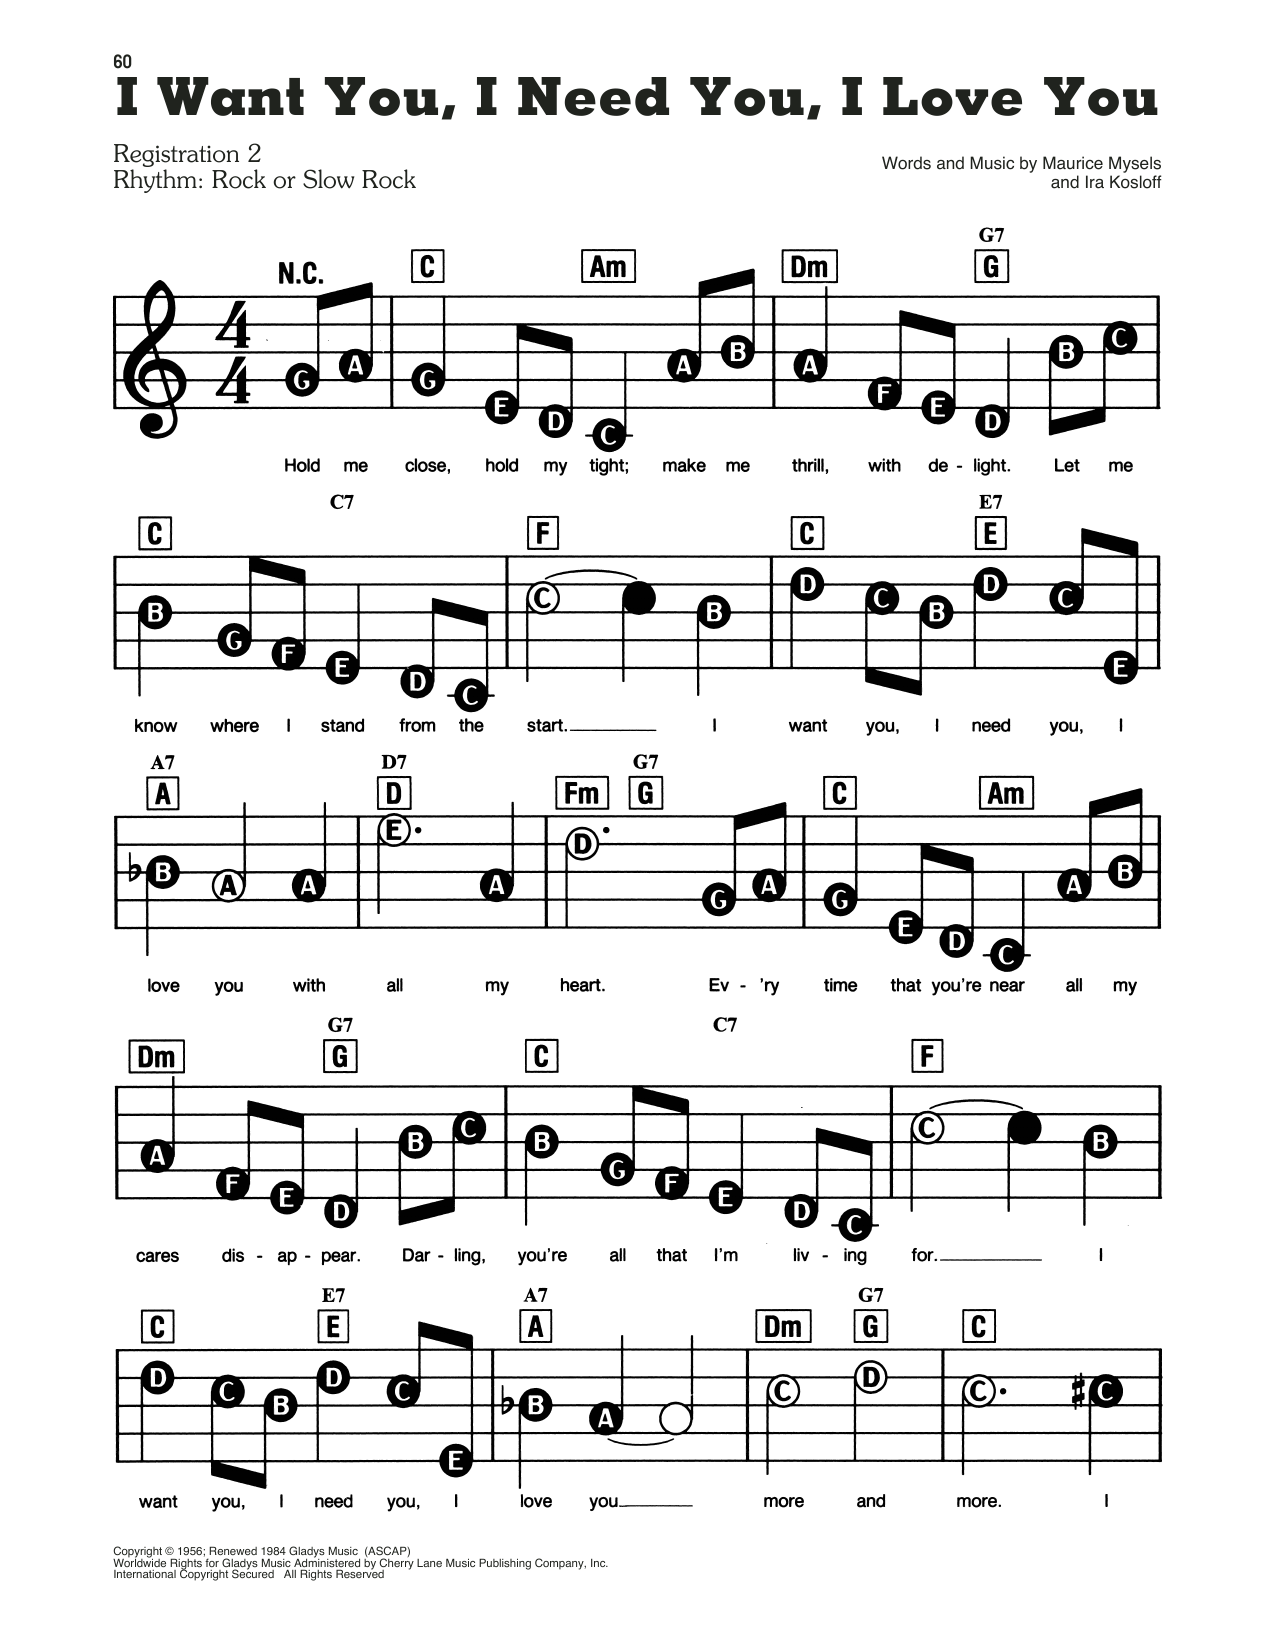 Elvis Presley I Want You, I Need You, I Love You sheet music notes and chords. Download Printable PDF.